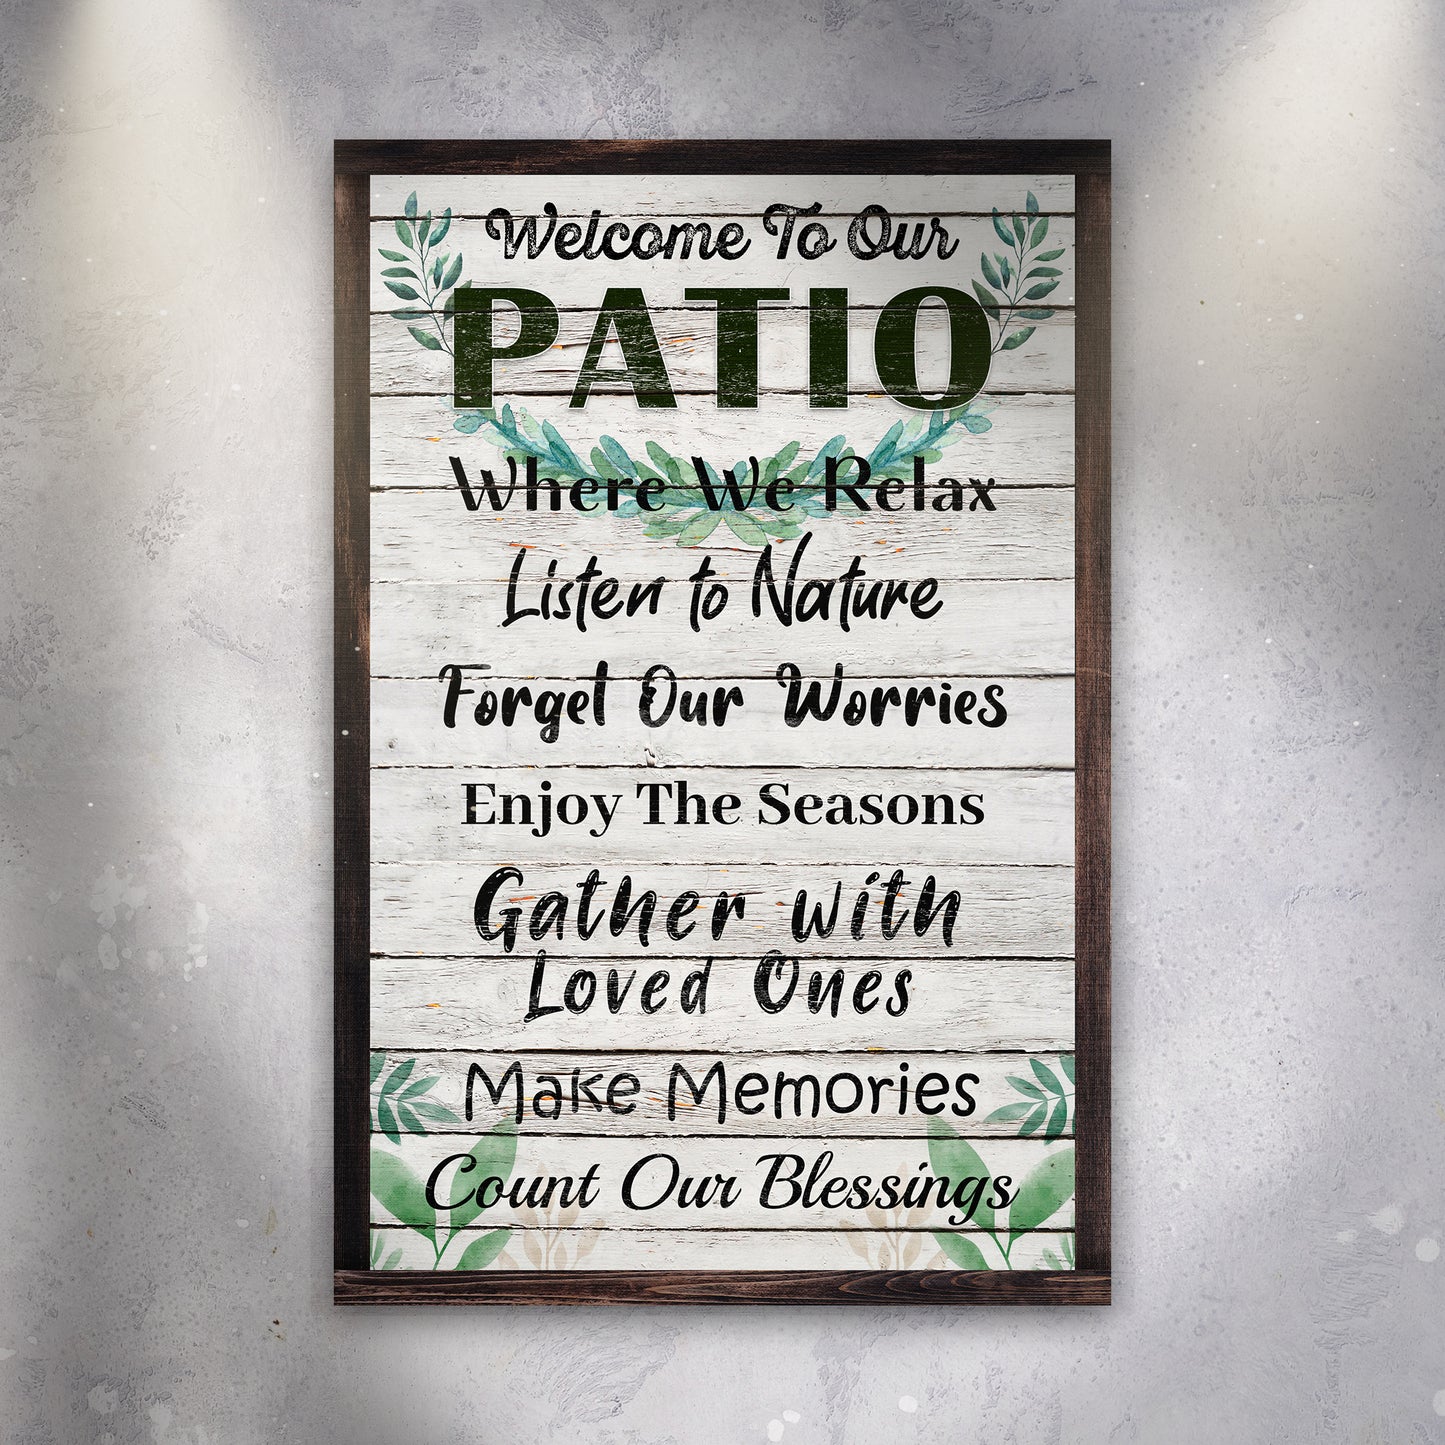 Patio Rules Sign IV - Image by Tailored Canvases